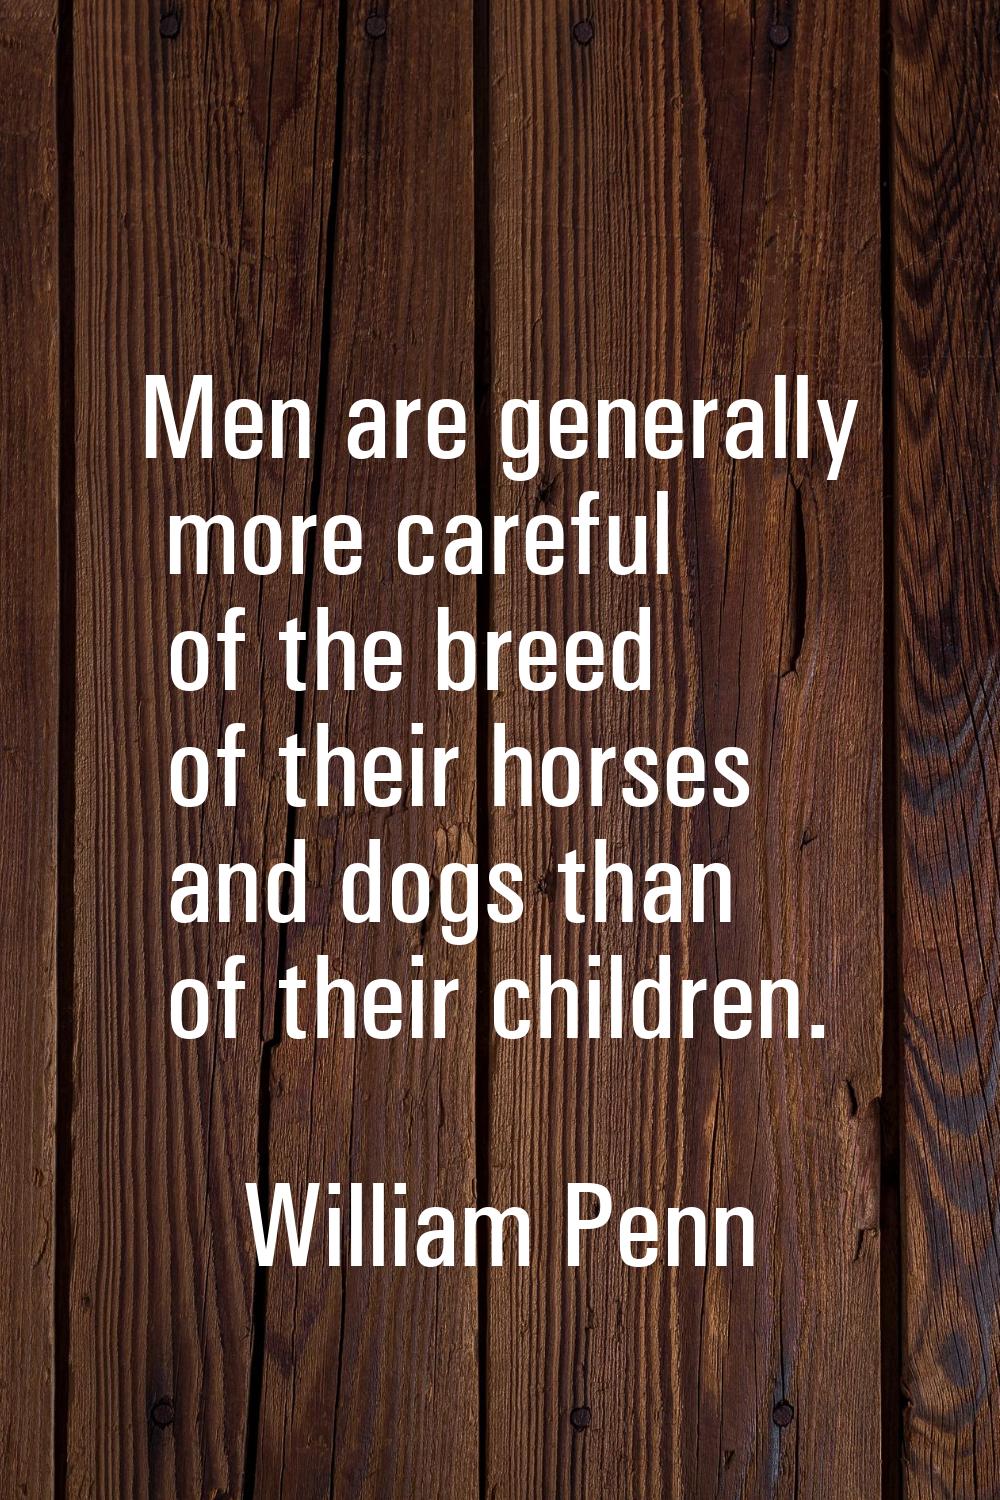 Men are generally more careful of the breed of their horses and dogs than of their children.